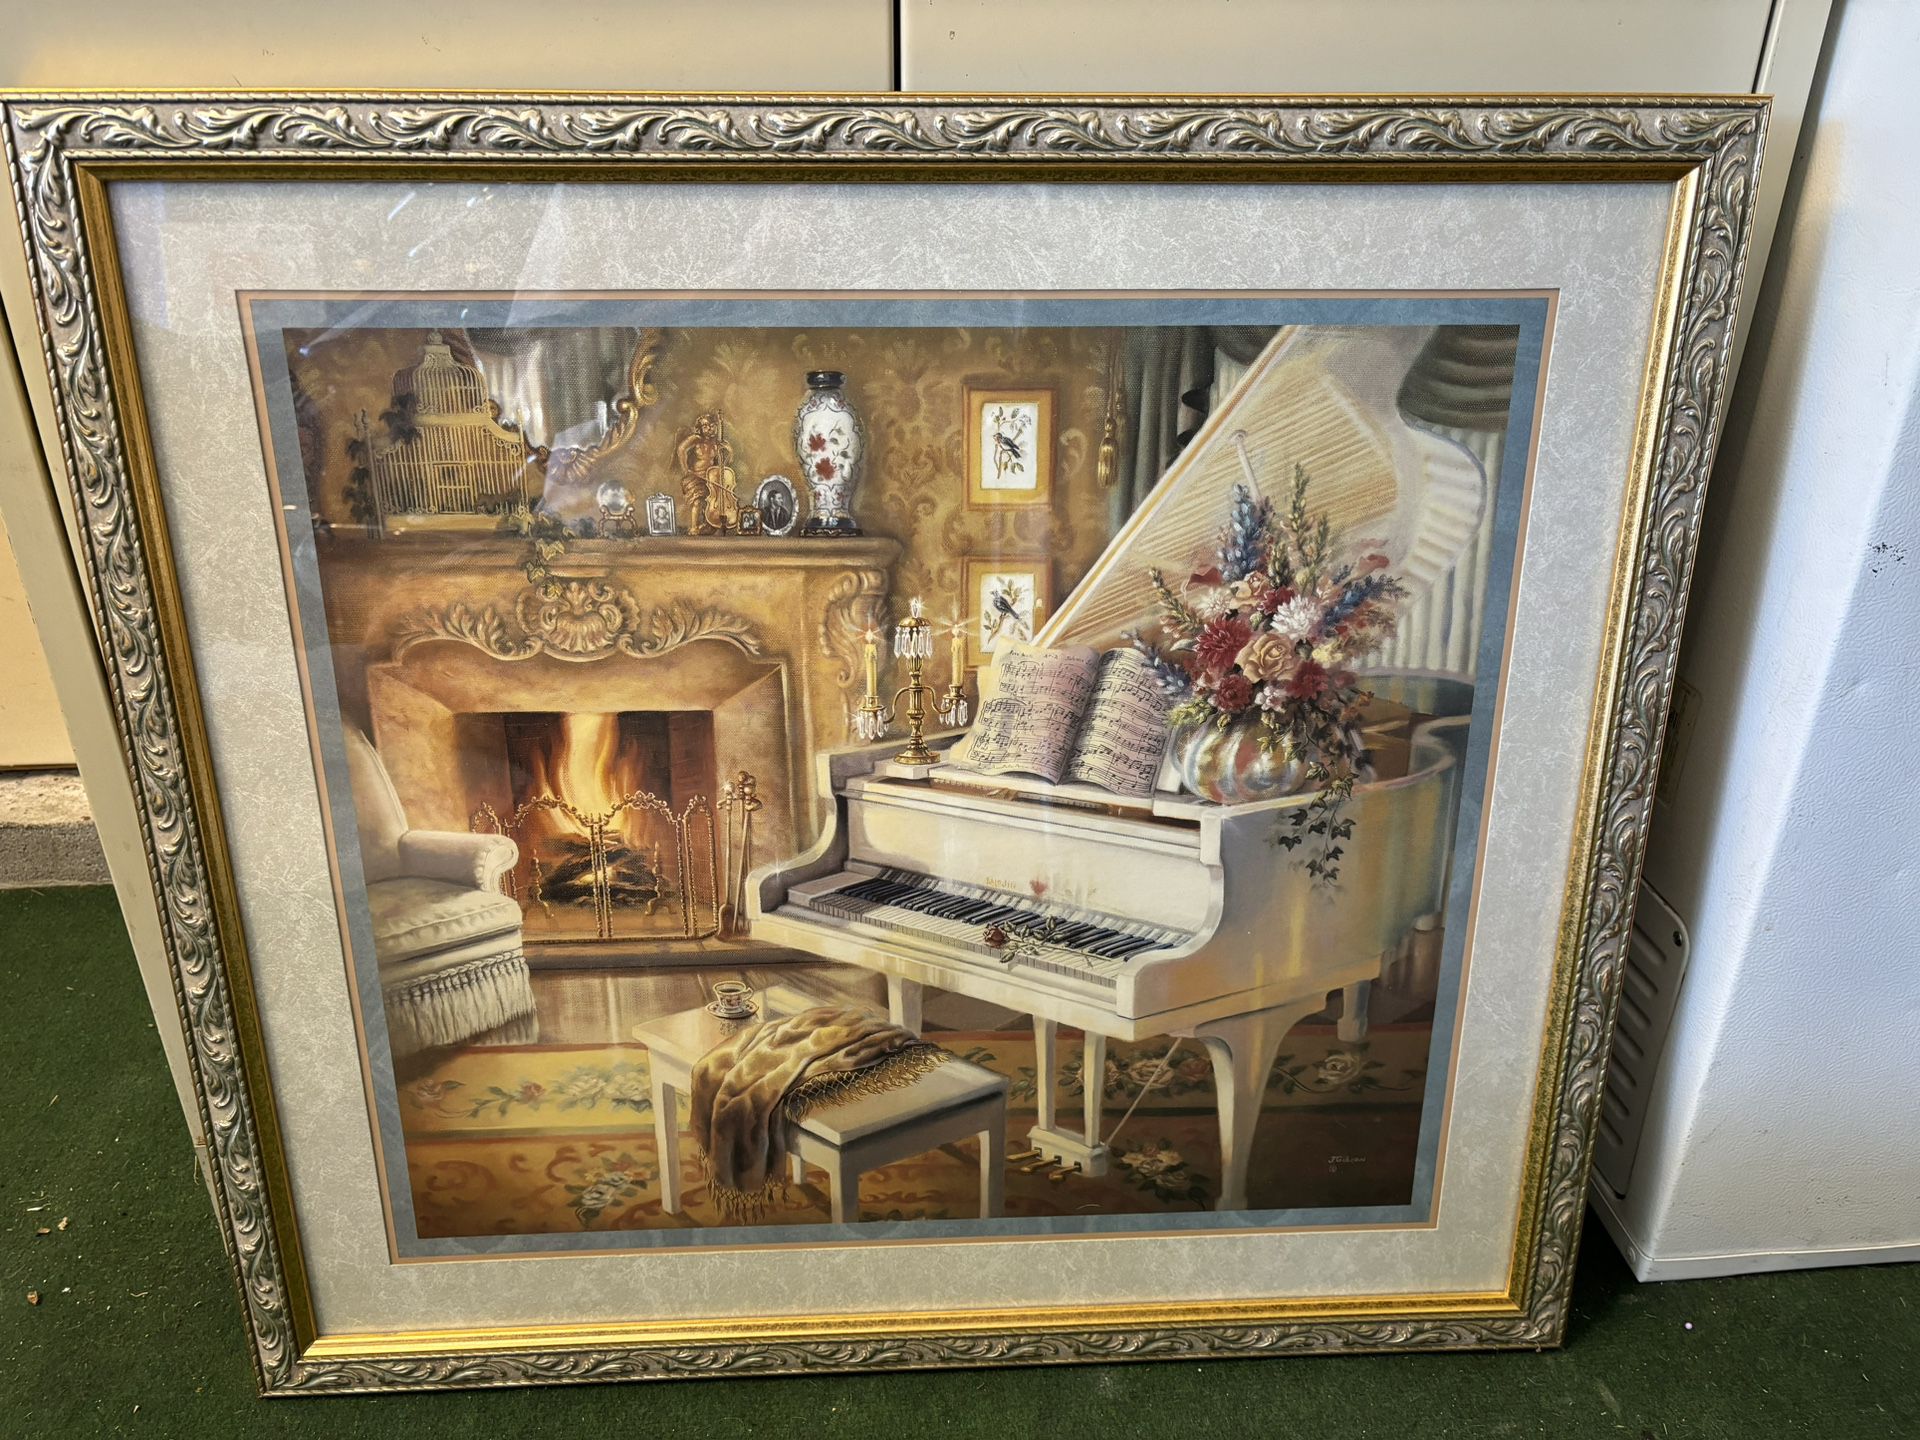 Home Interiors Piano/Fireplace Framed Wall Art